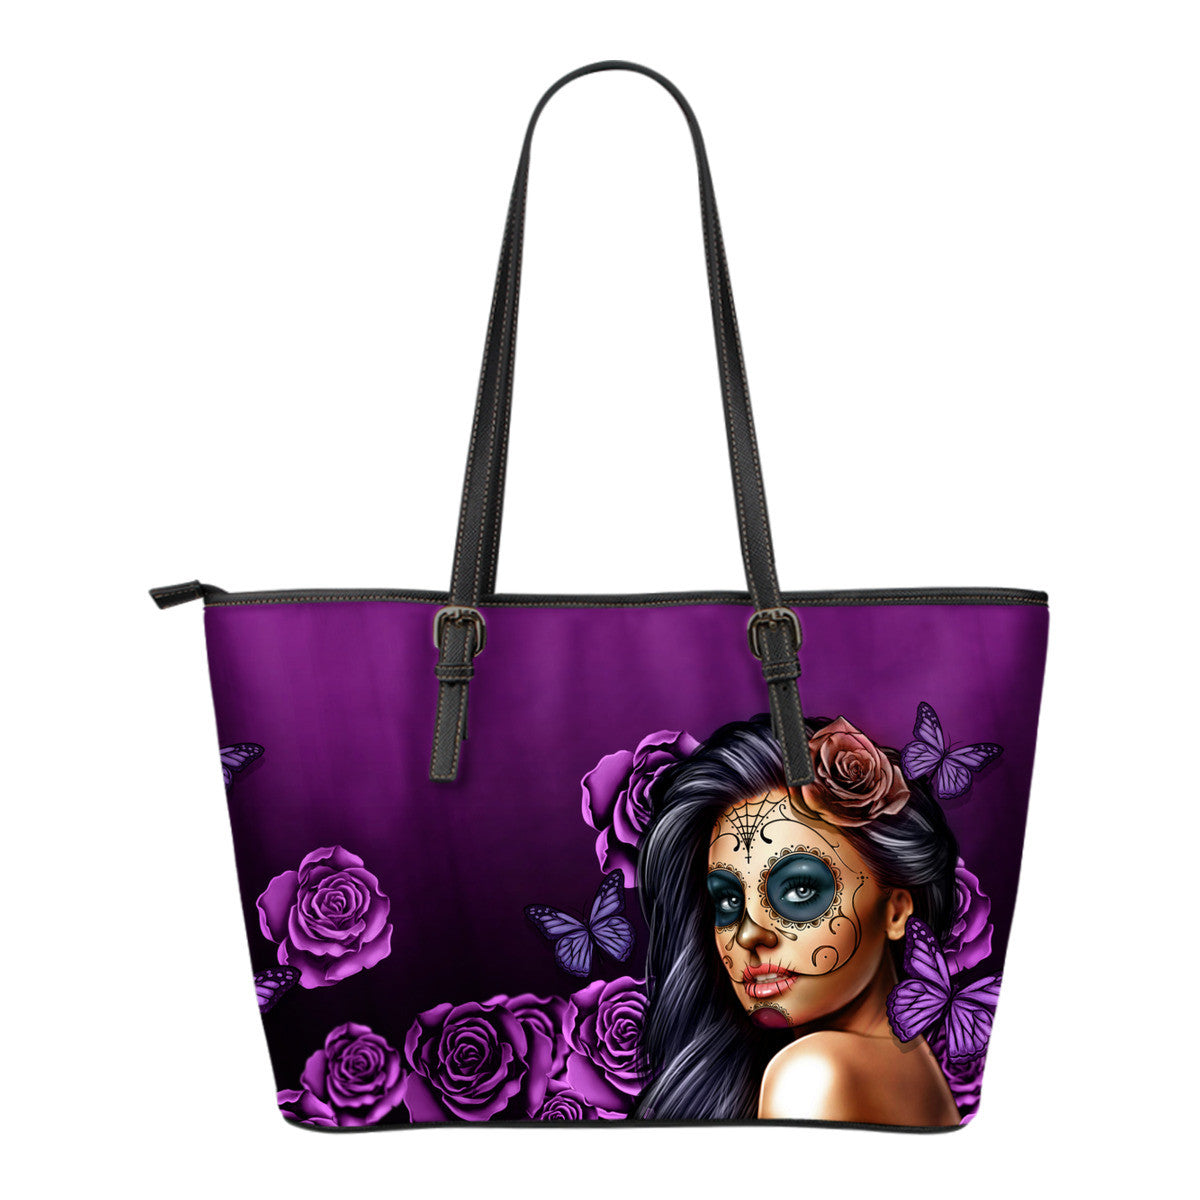 Tattoo Calavera Girl Small Leather Tote Bag - Collection 1